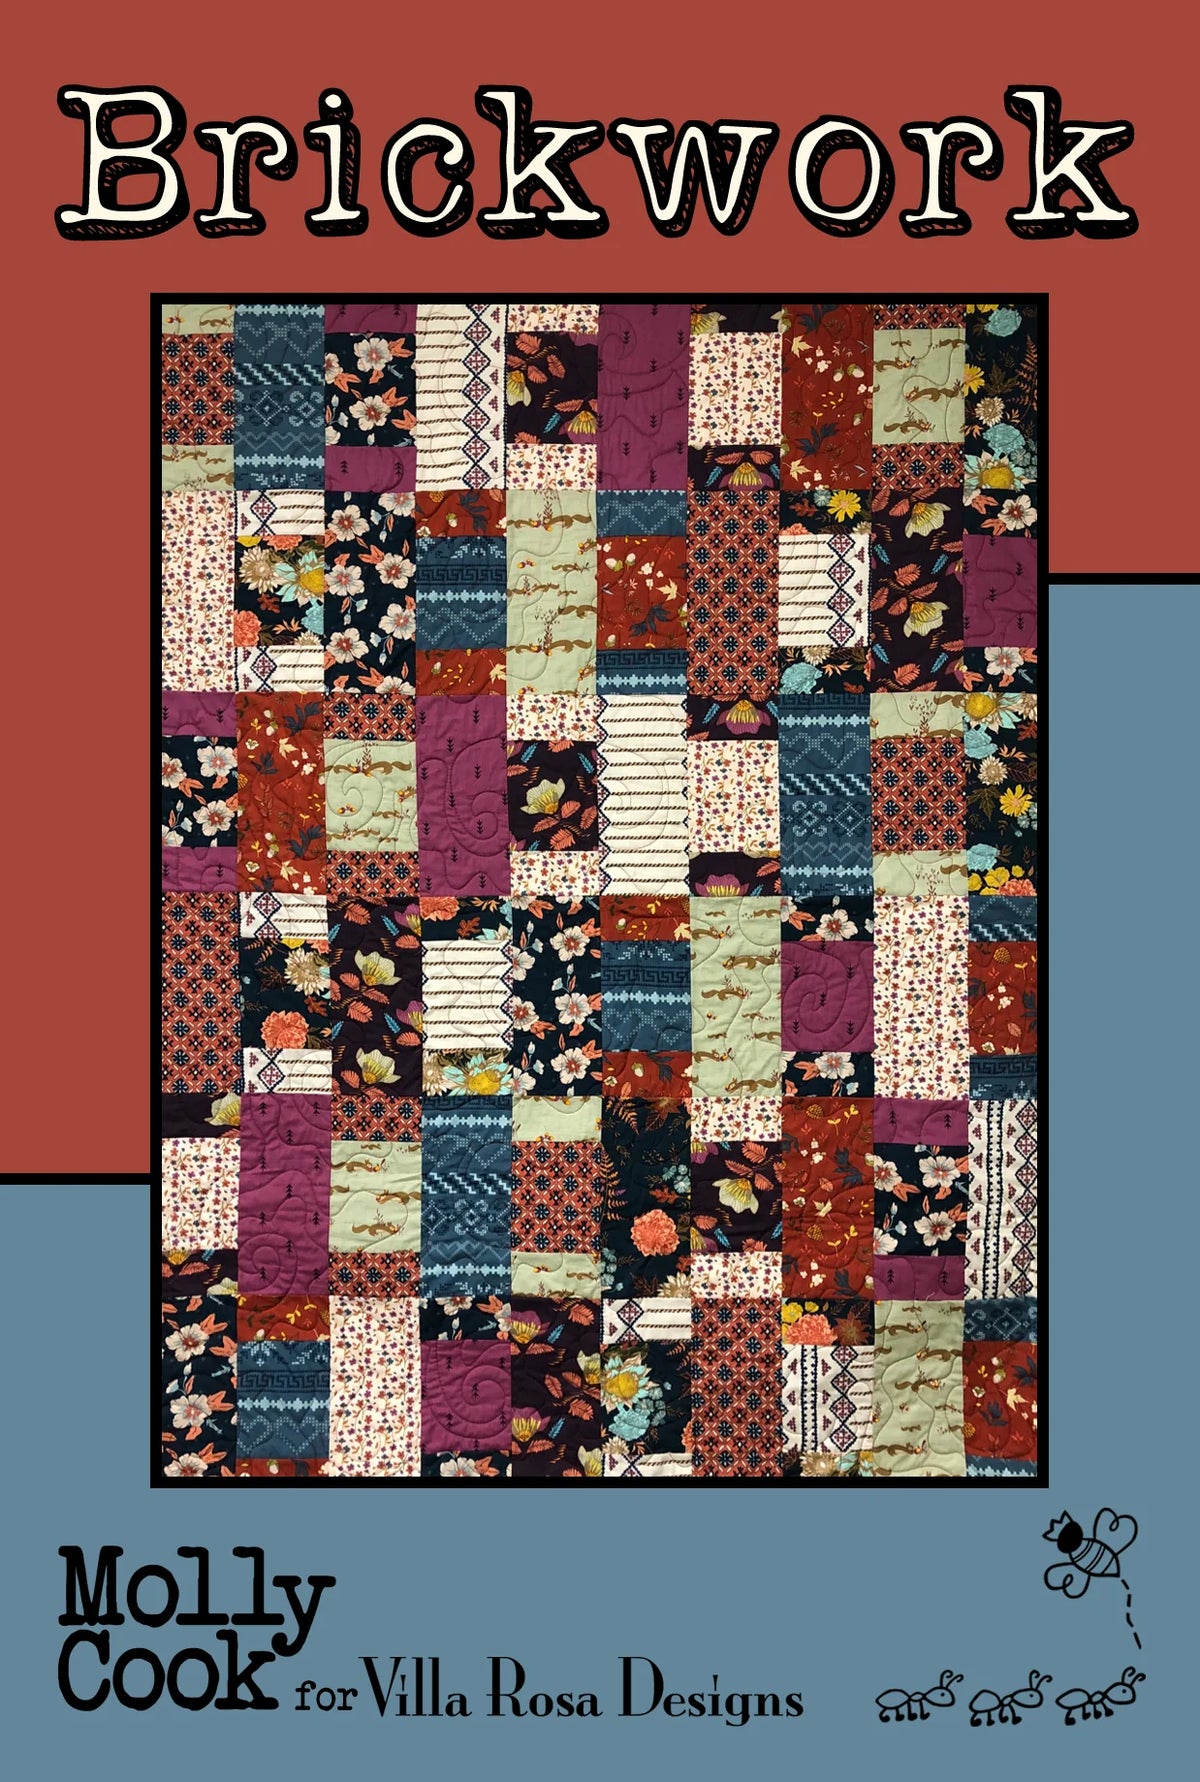 Paper Piecing Class with Kim – Cary Quilting Company